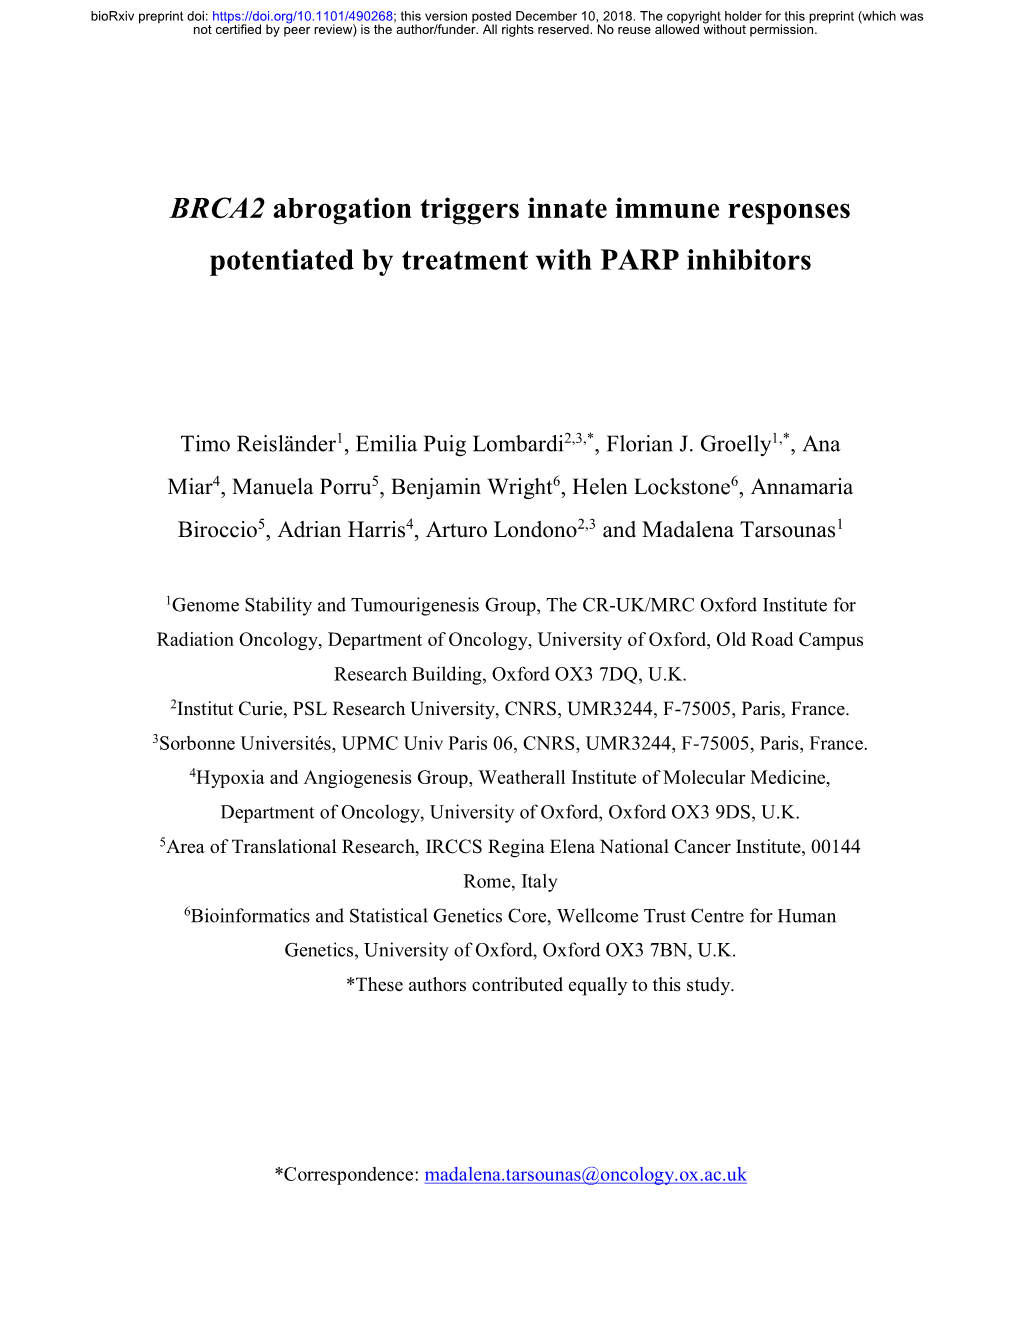 BRCA2 Abrogation Triggers Innate Immune Responses Potentiated by Treatment with PARP Inhibitors